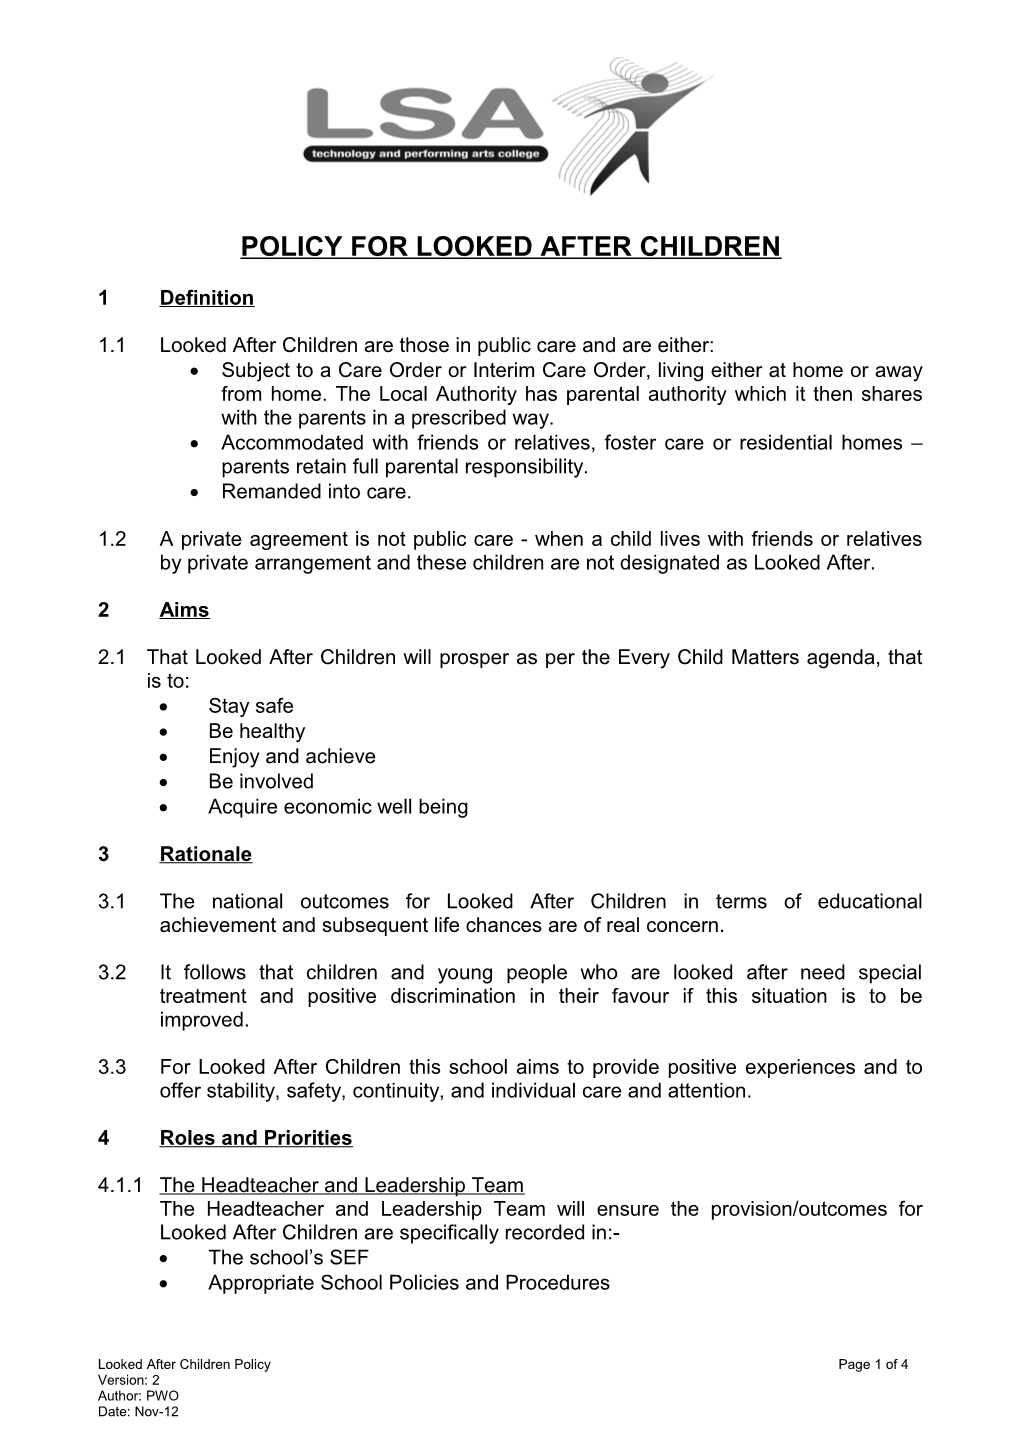 Model for a School's Policy for the Education of Looked After Children